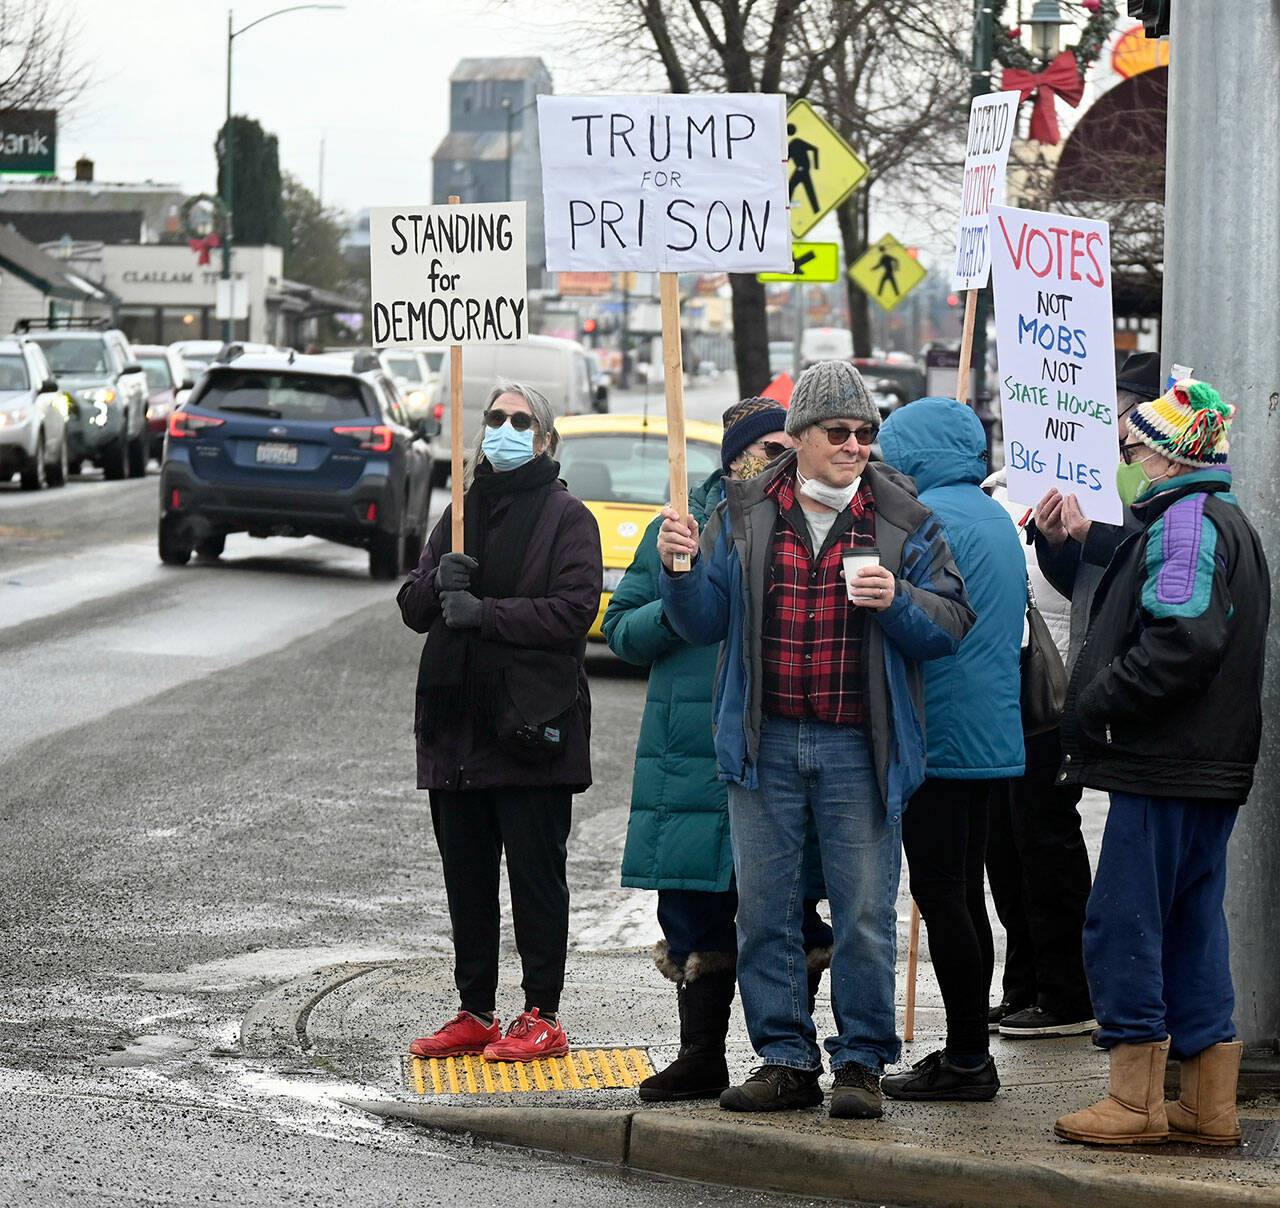 At least 125 people stand on the corners of Washington Street and Sequim Avenue on Thursday morning for a vigil on the one-year anniversary of the Jan. 6 insurrection at the U.S. Capitol. The vigil was hosted by Indivisible Sequim. Later in the day, the League of Women Voters of Jefferson County hosted in Port Townsend a candlelight vigil to remember the law enforcement officers killed or wounded on duty at the Capitol on Jan. 6 and to show support for voting rights. (Emily Matthiessen/Olympic Peninsula News Group)